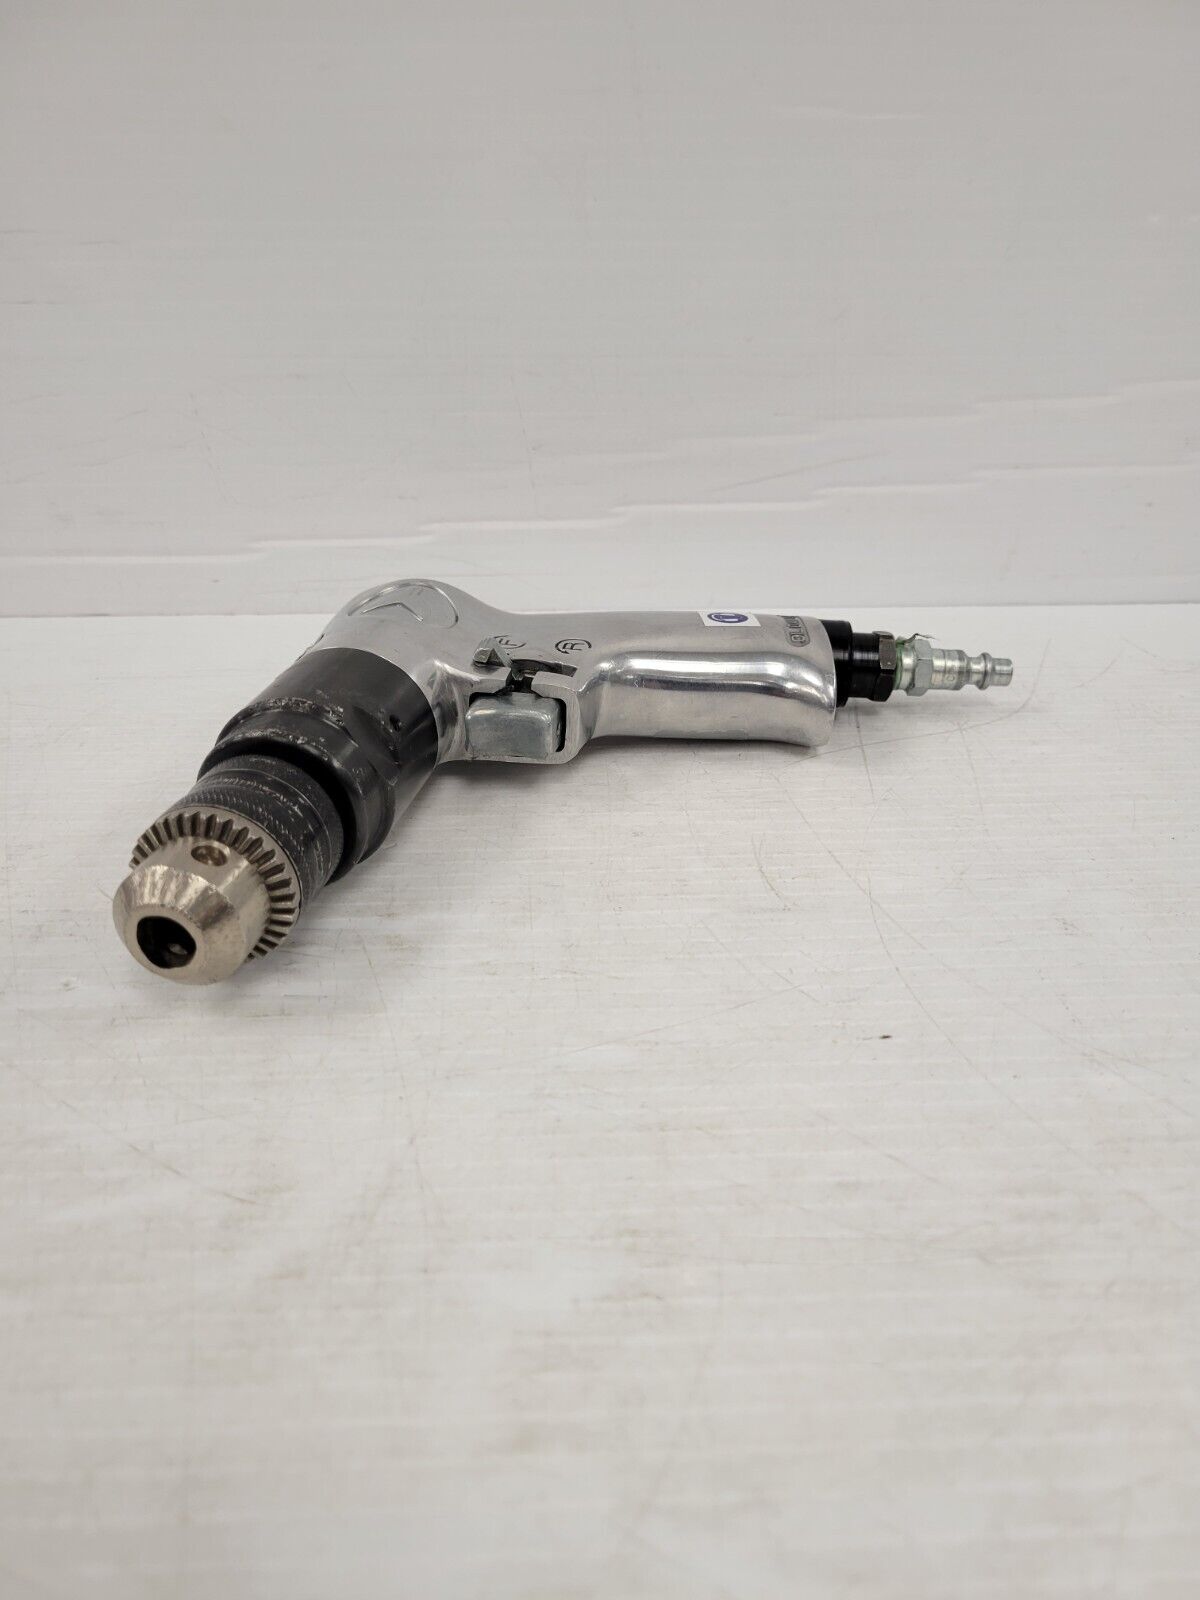 (41605-1) Jet ADX380R Air Drill